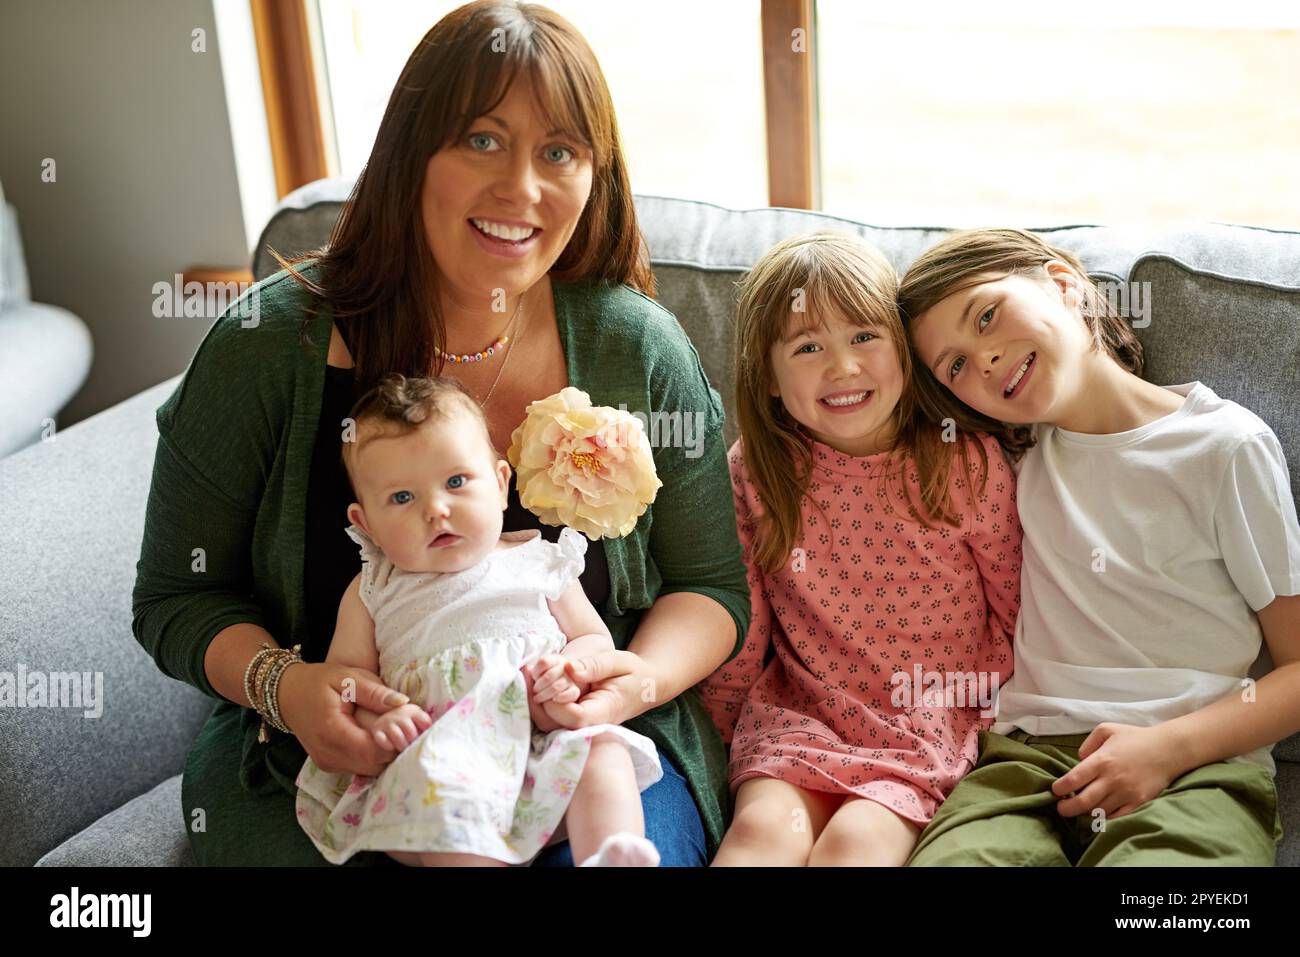 One big blessed family. Portrait of a mother bonding with her three little children at home. Stock Photo